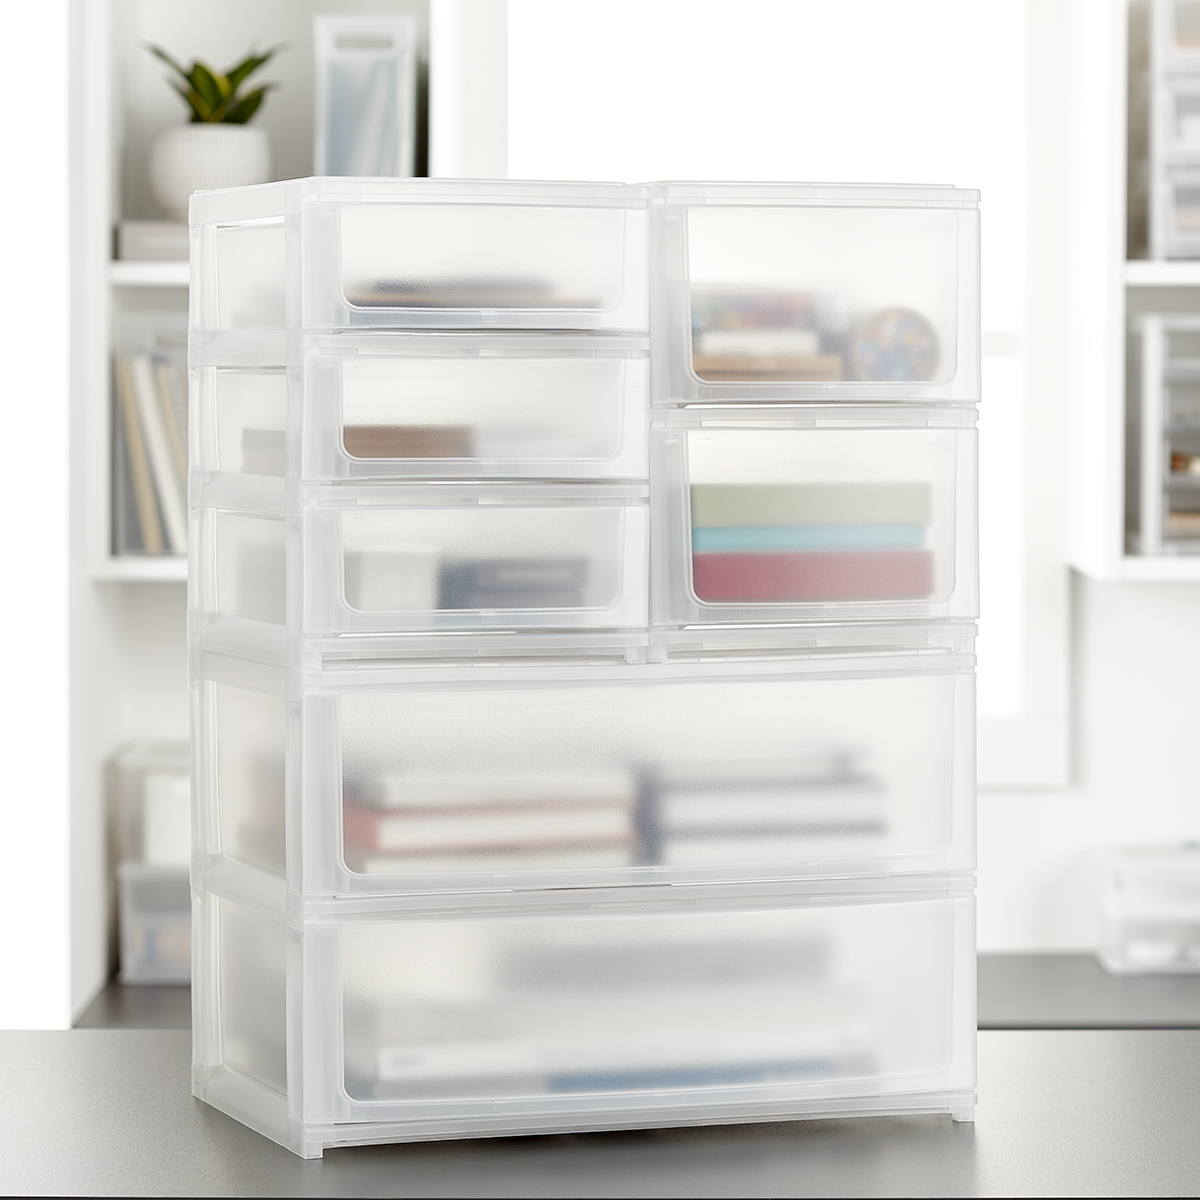 https://www.containerstore.com/catalogimages/434652/10079317g_Shimo_stacking_drawer_orga.jpg